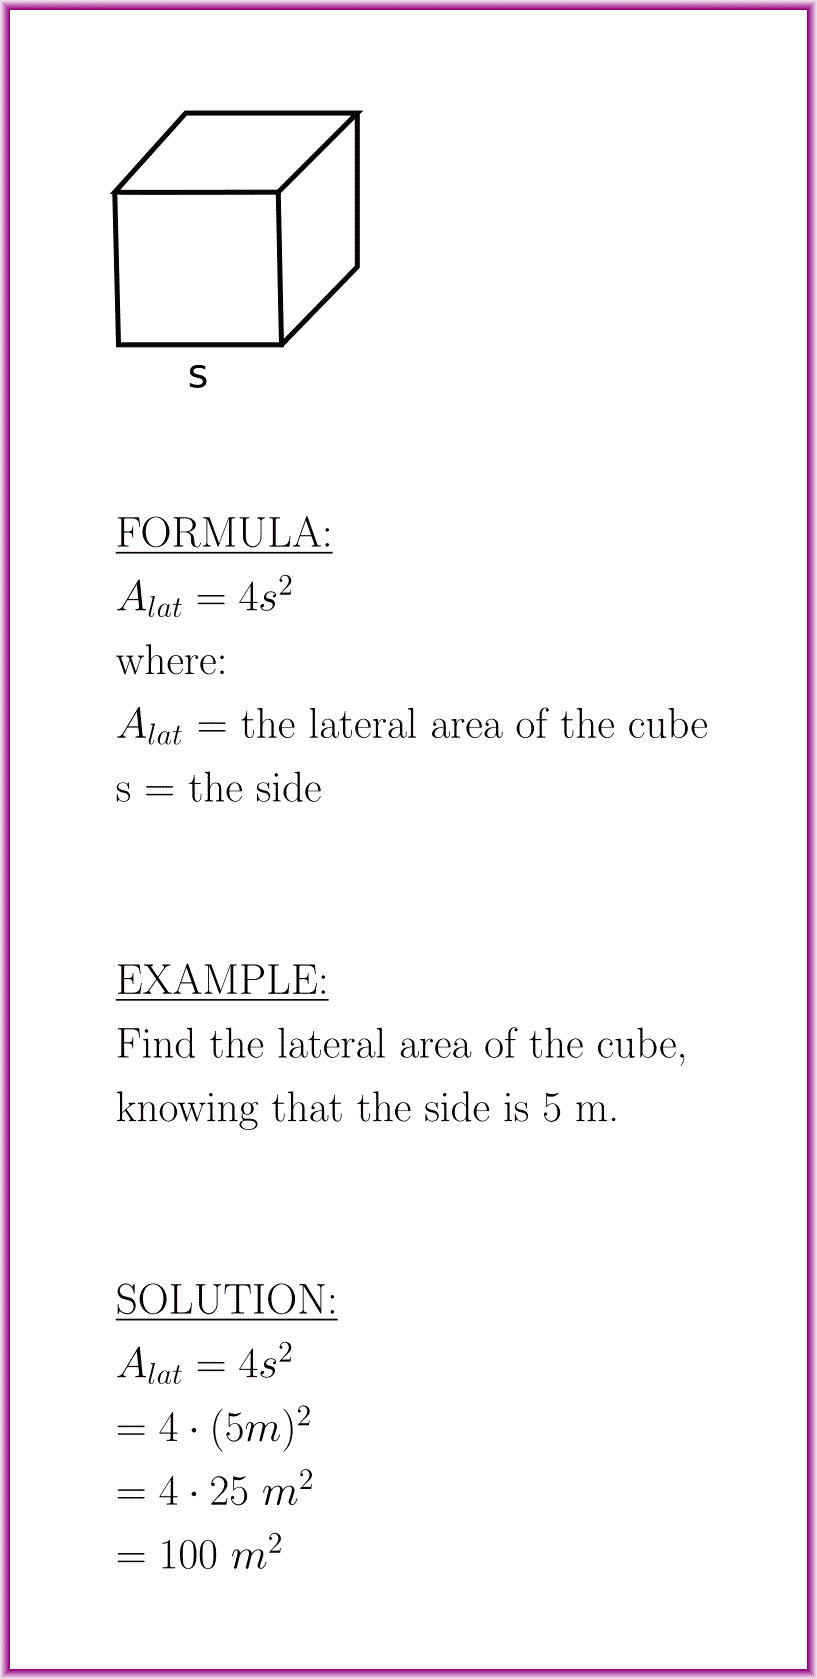 The lateral area of the cube (formula with example)